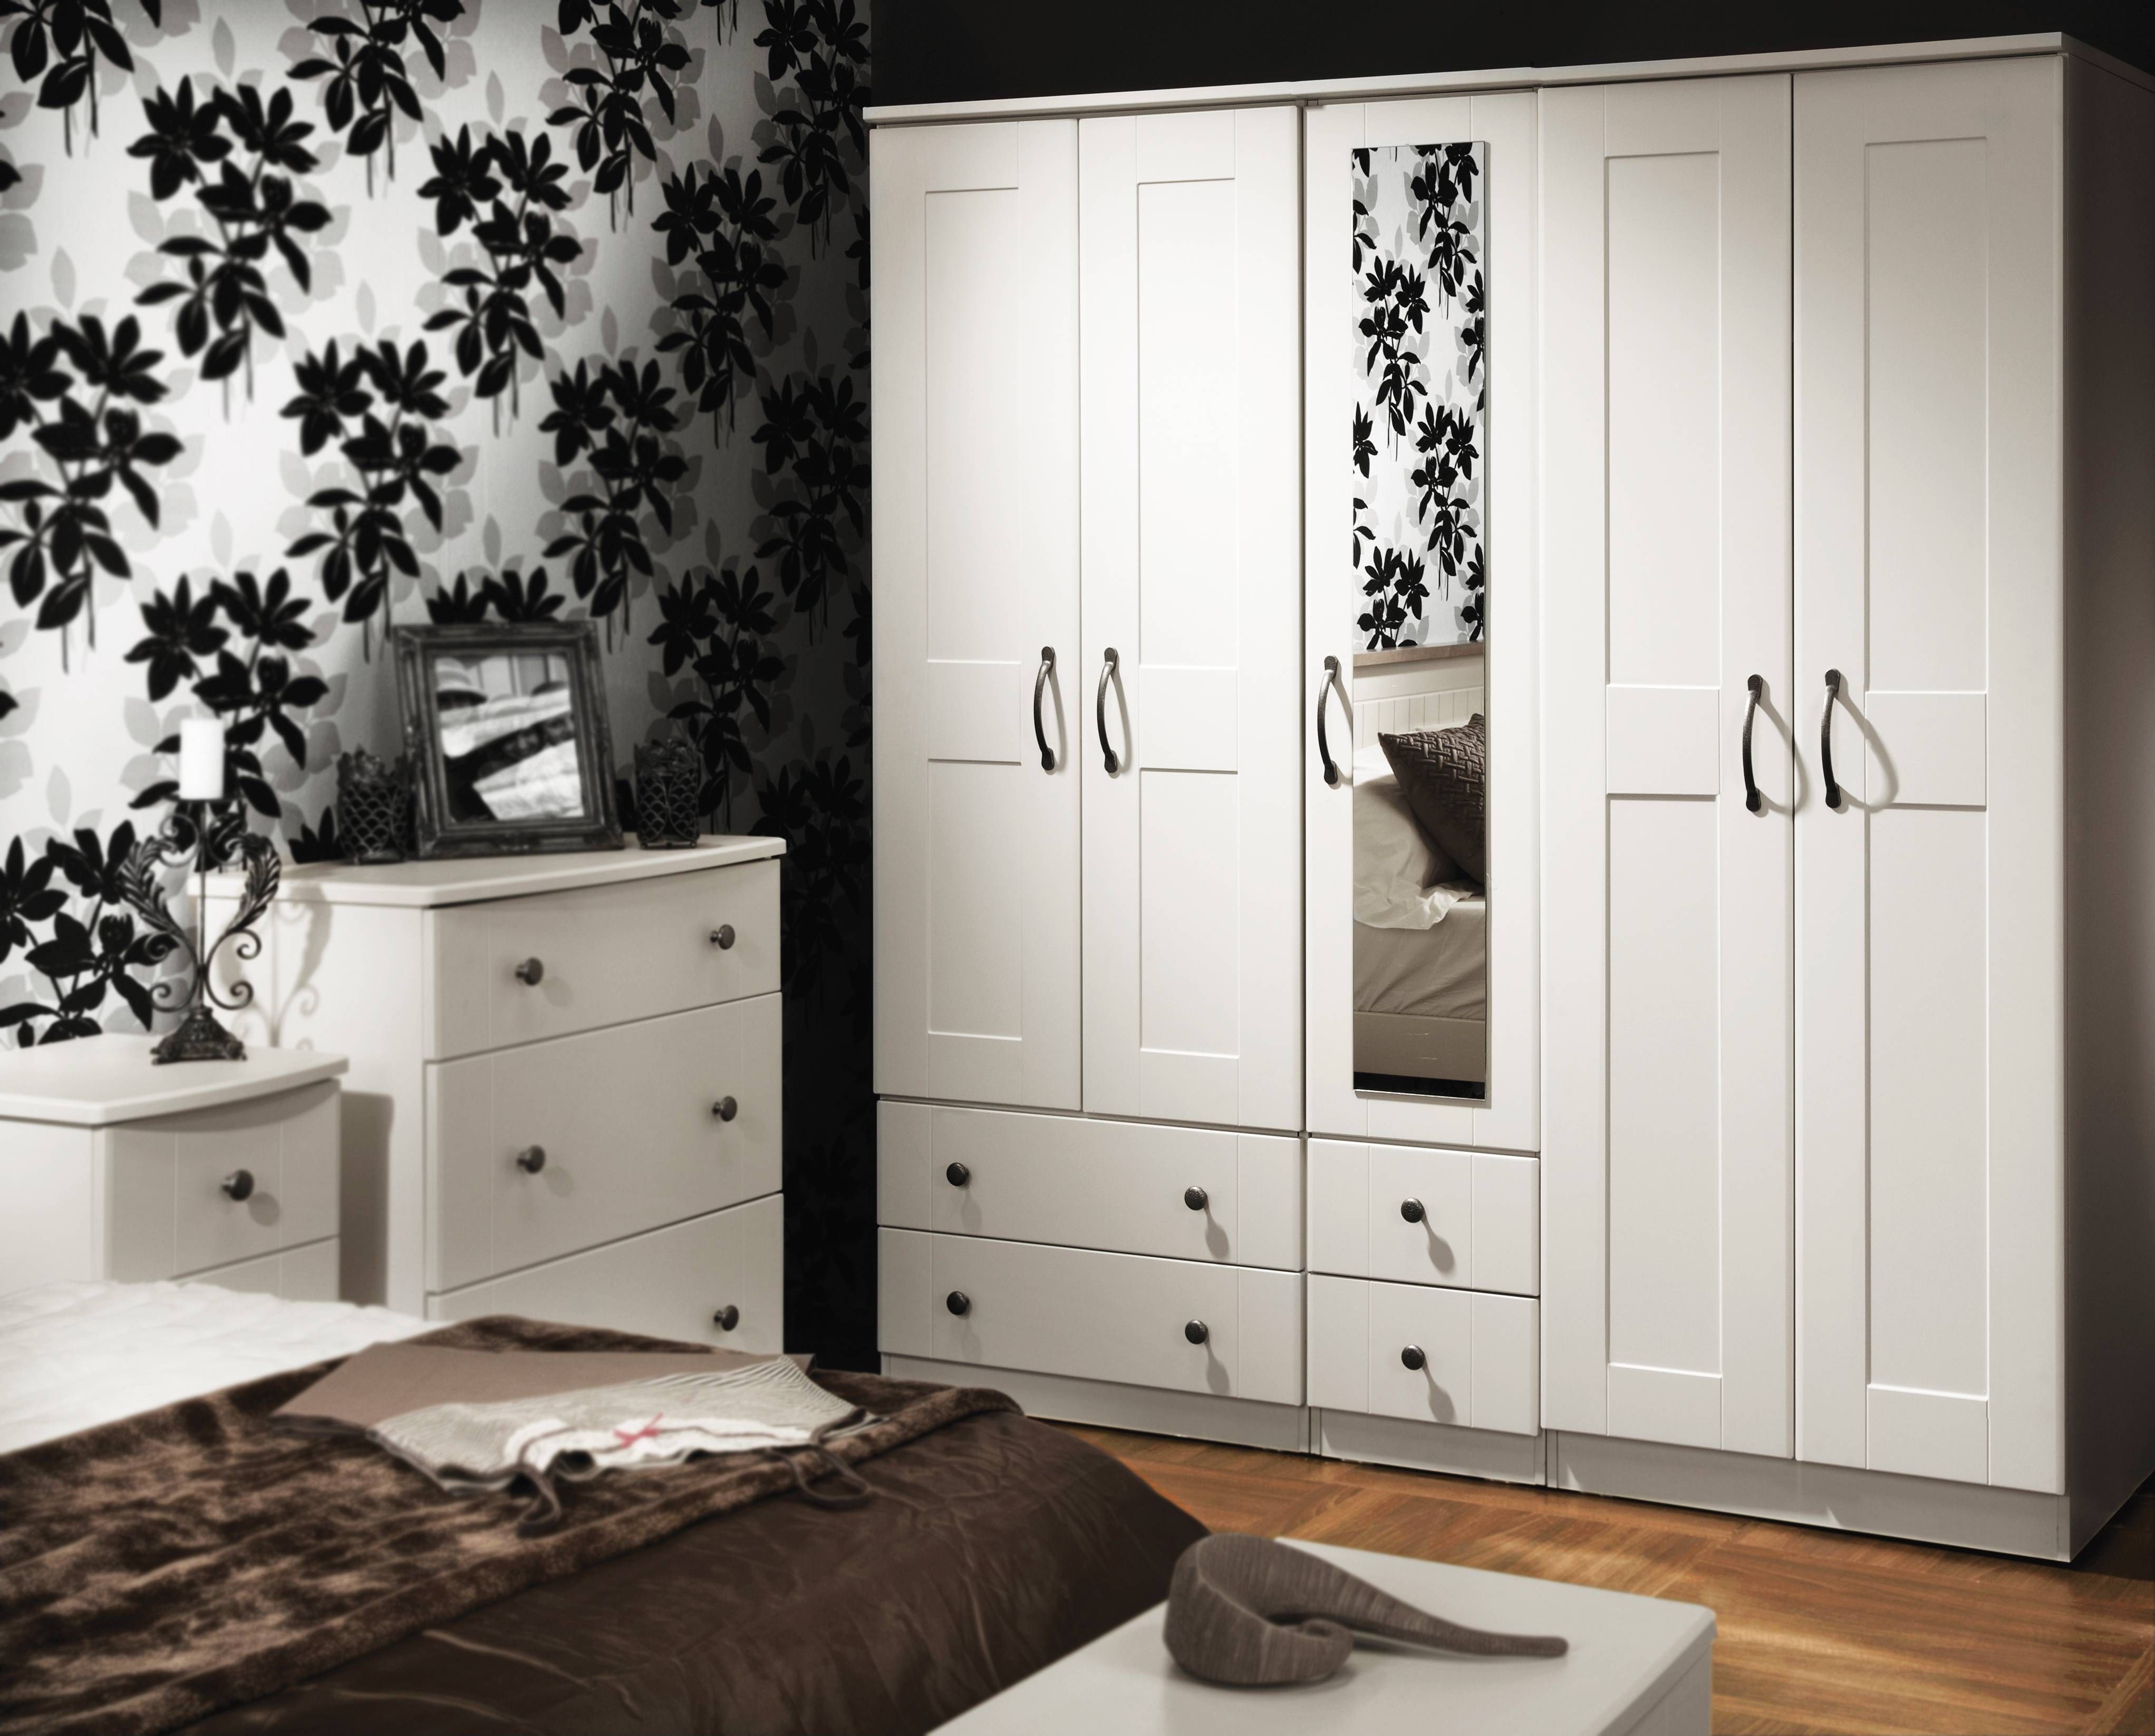 Kingsley Bedroom | Lifestyle Furniture Pertaining To Wardrobes Sets (View 2 of 15)